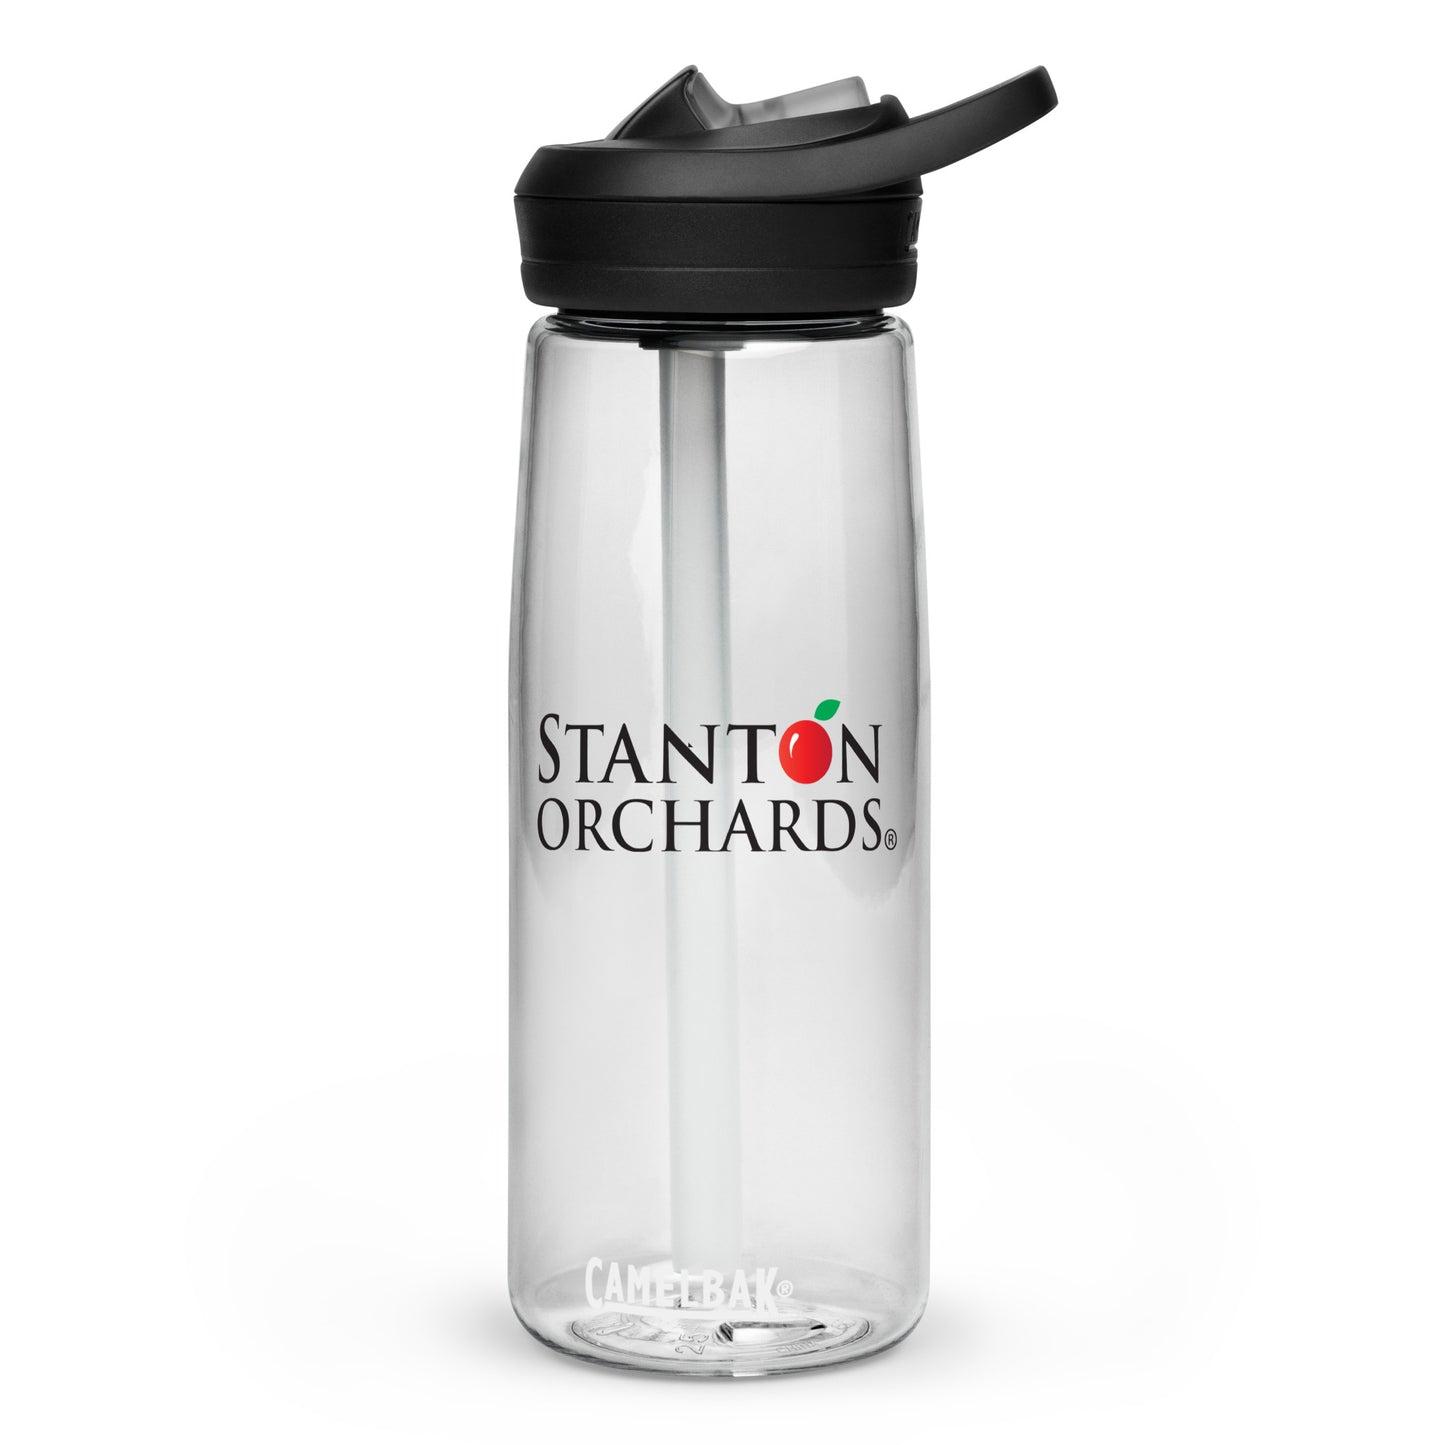 Lifestyle Water Bottle for Stanton Orchards fans - Recycled - Use for All Occasions